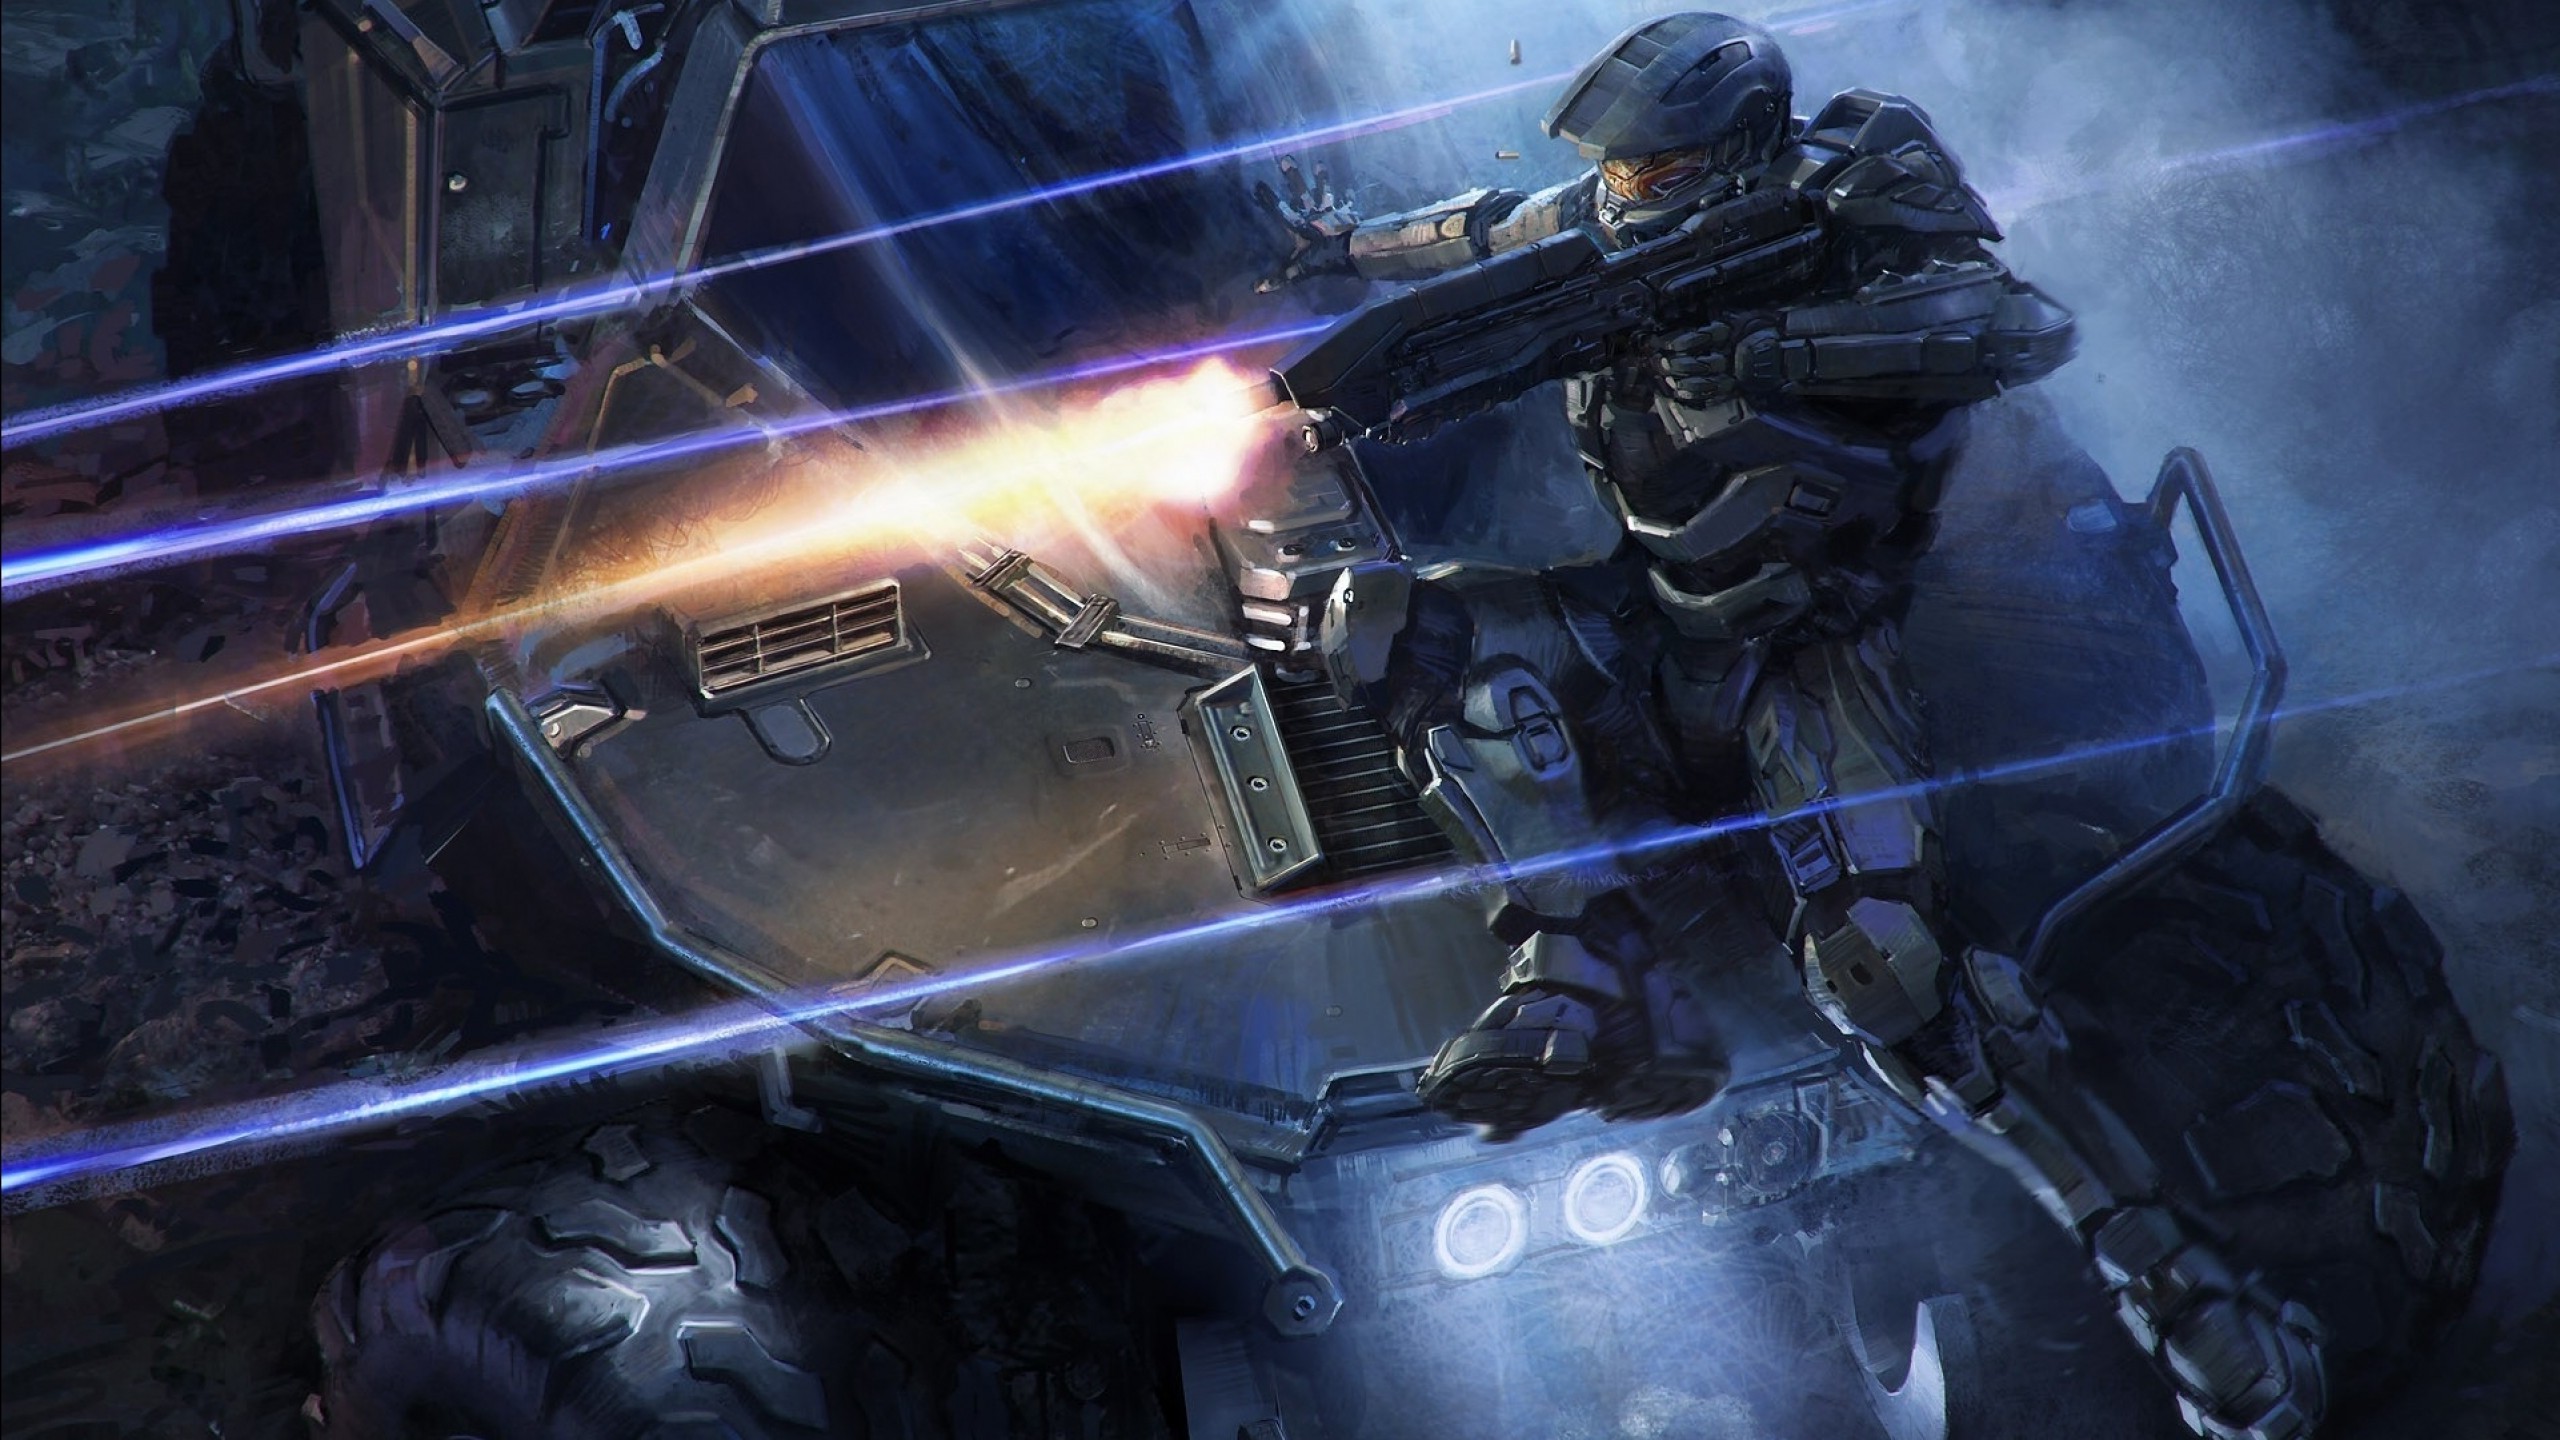 Halo, Master Chief, Halo 4, Xbox One, Halo: Master Chief Collection, Video Games, Digital Art Wallpaper